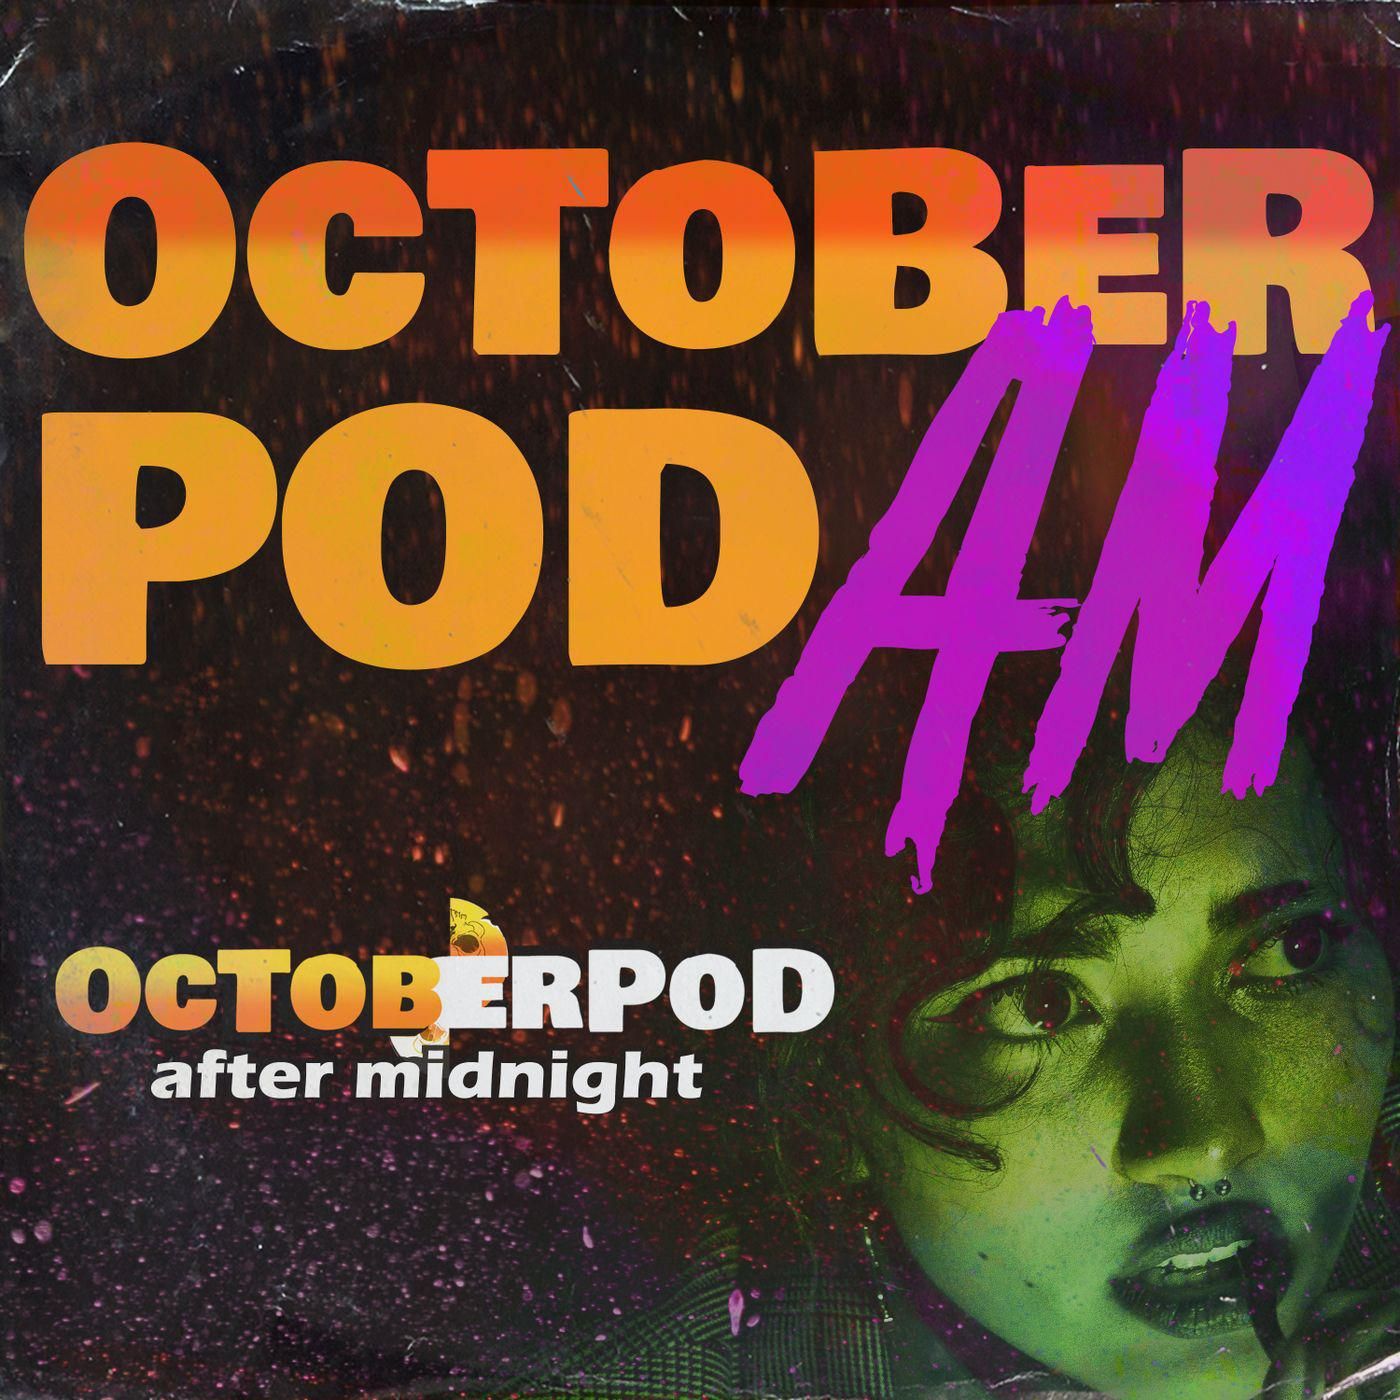 Ghost Stories For Christmas by Octoberpod AM